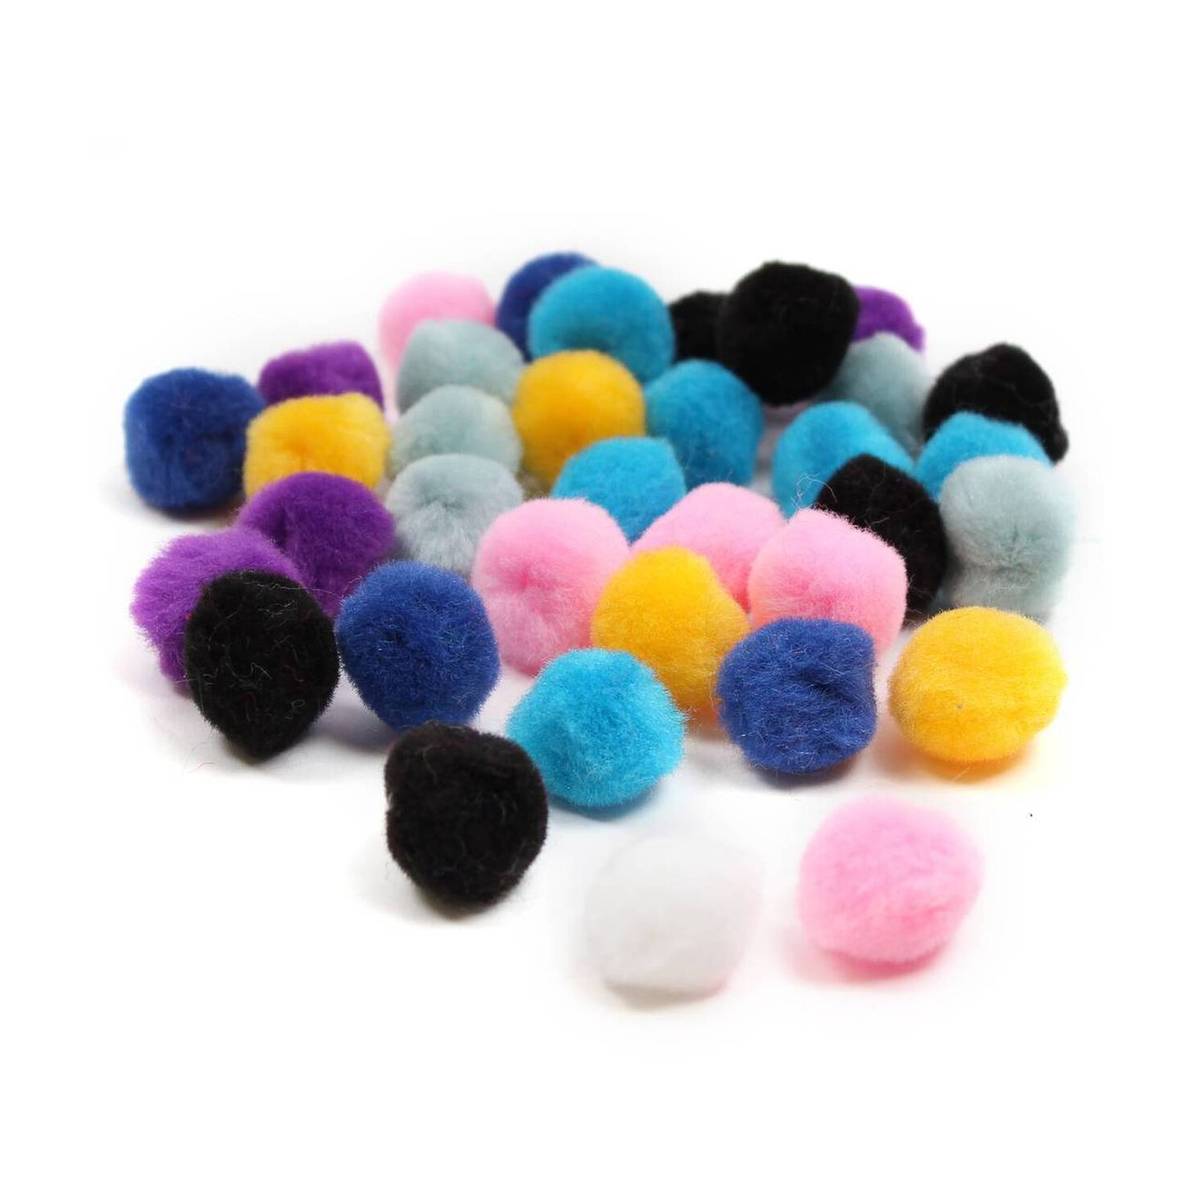  Very Large Assorted Pom Poms for DIY Creative Crafts  Decorations, Assorted Colors (50Pack 2.5 Inch) : Arts, Crafts & Sewing